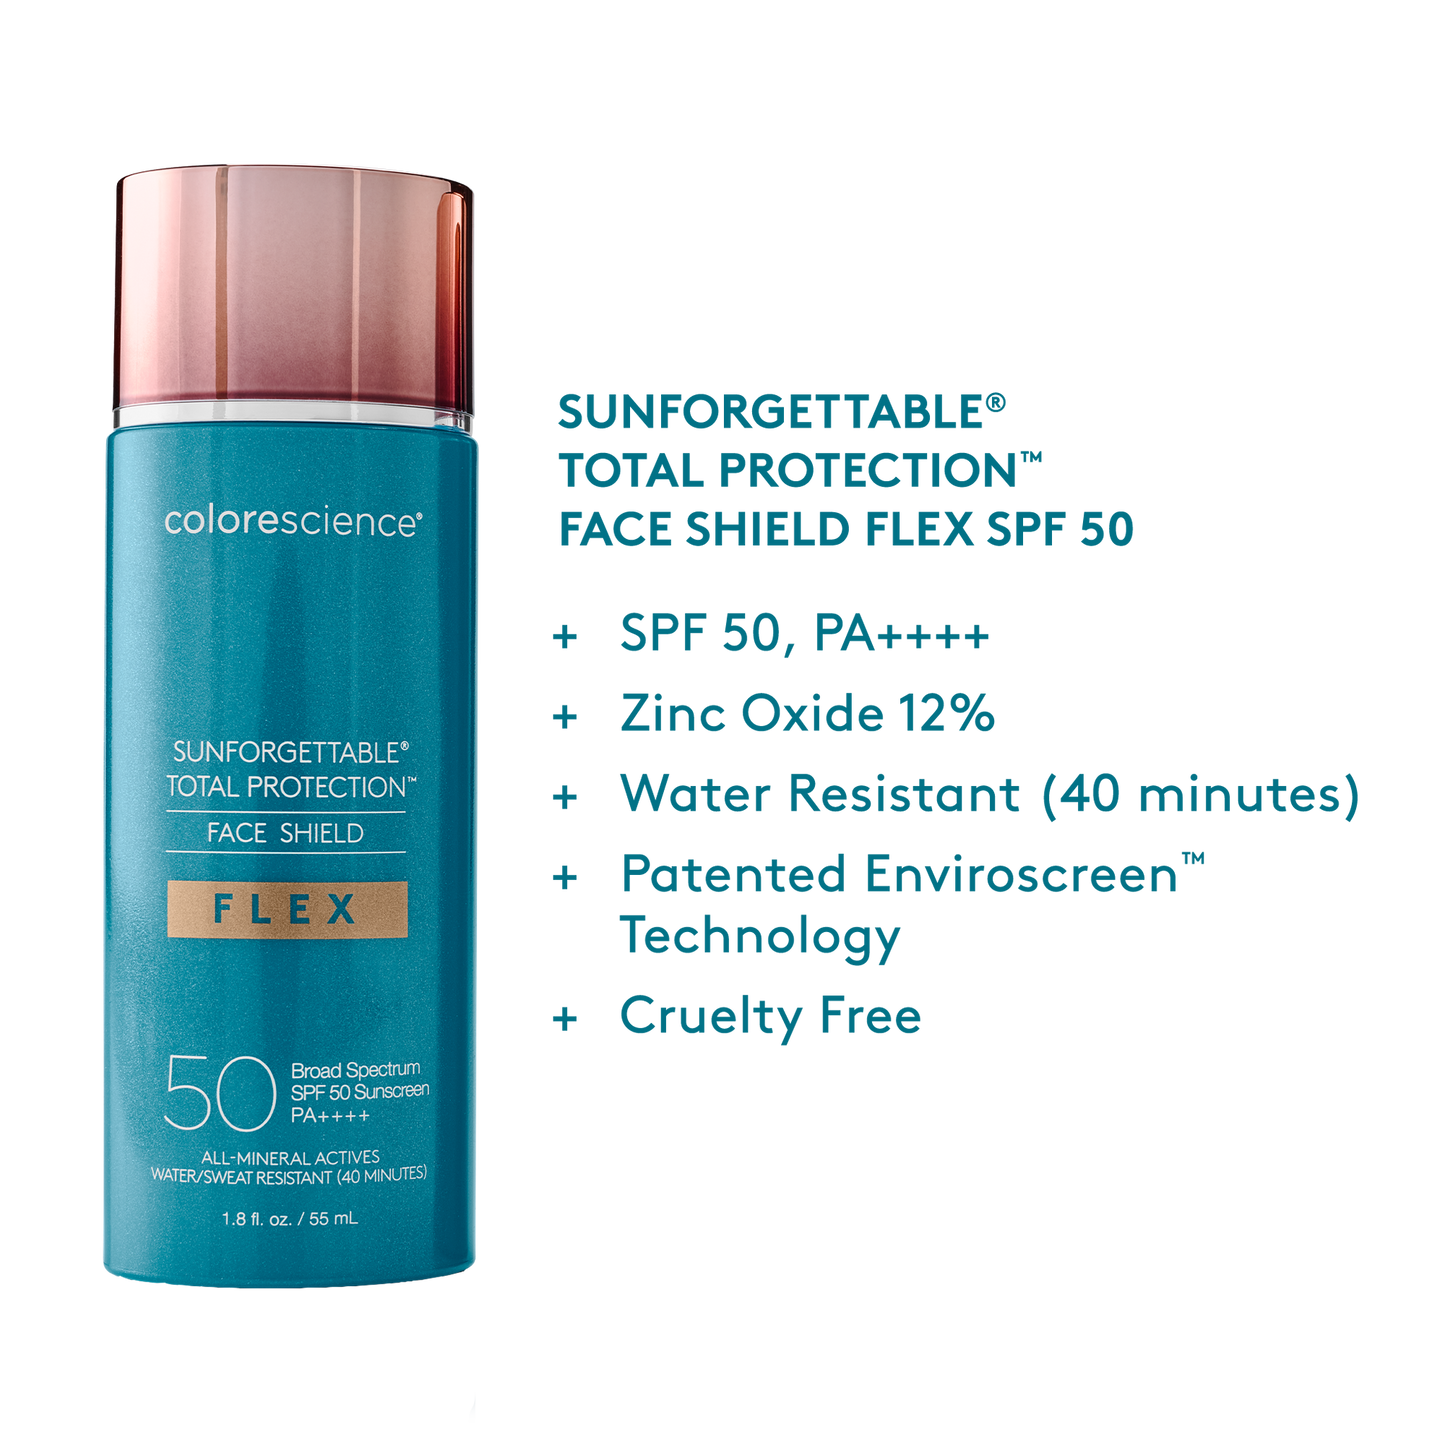 Sunforgettable® Total Protection® Face Shield Flex SPF 50